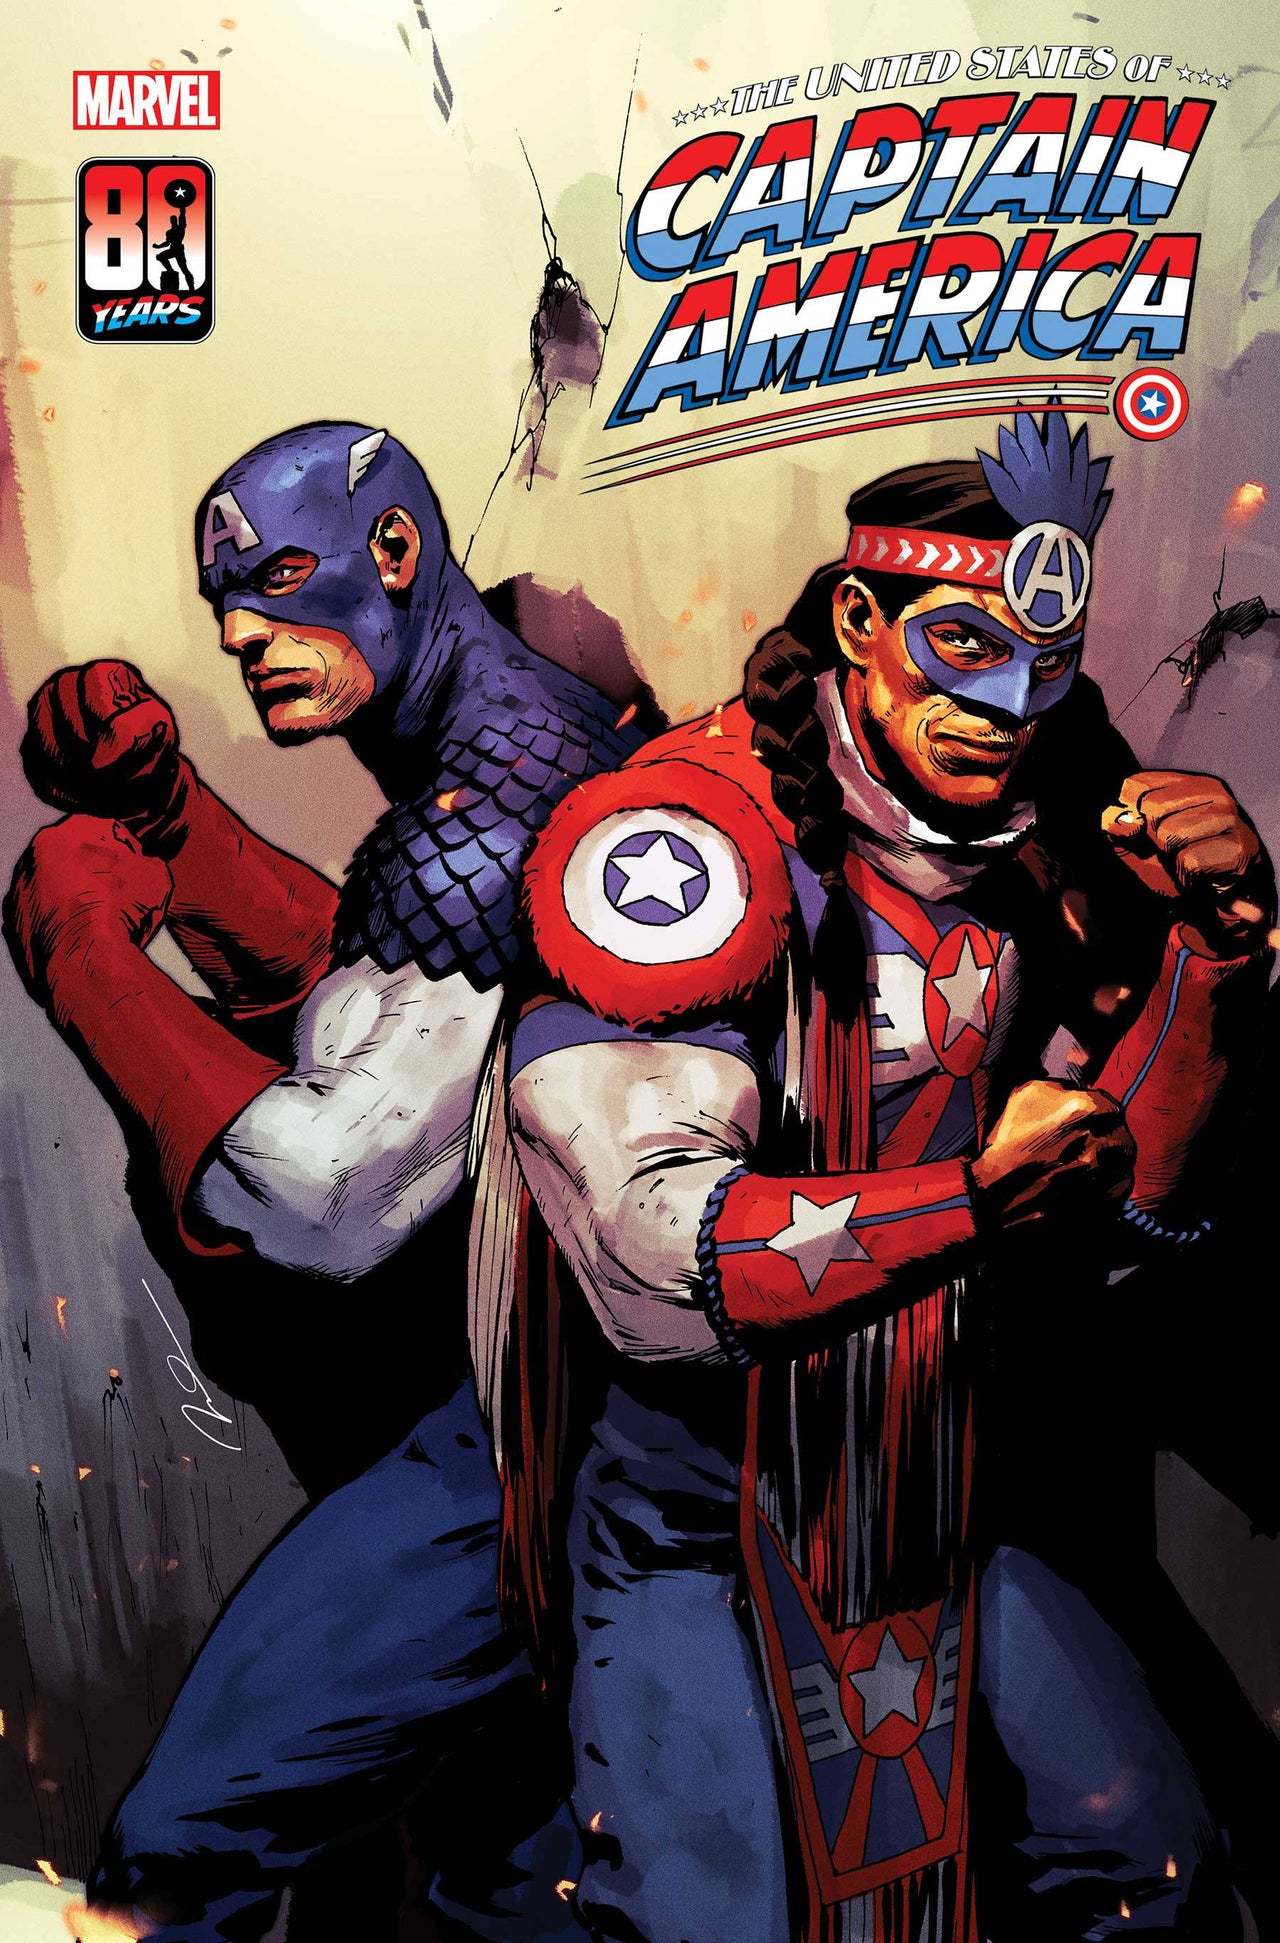 The United States Of Captain America Vol. 1 #3